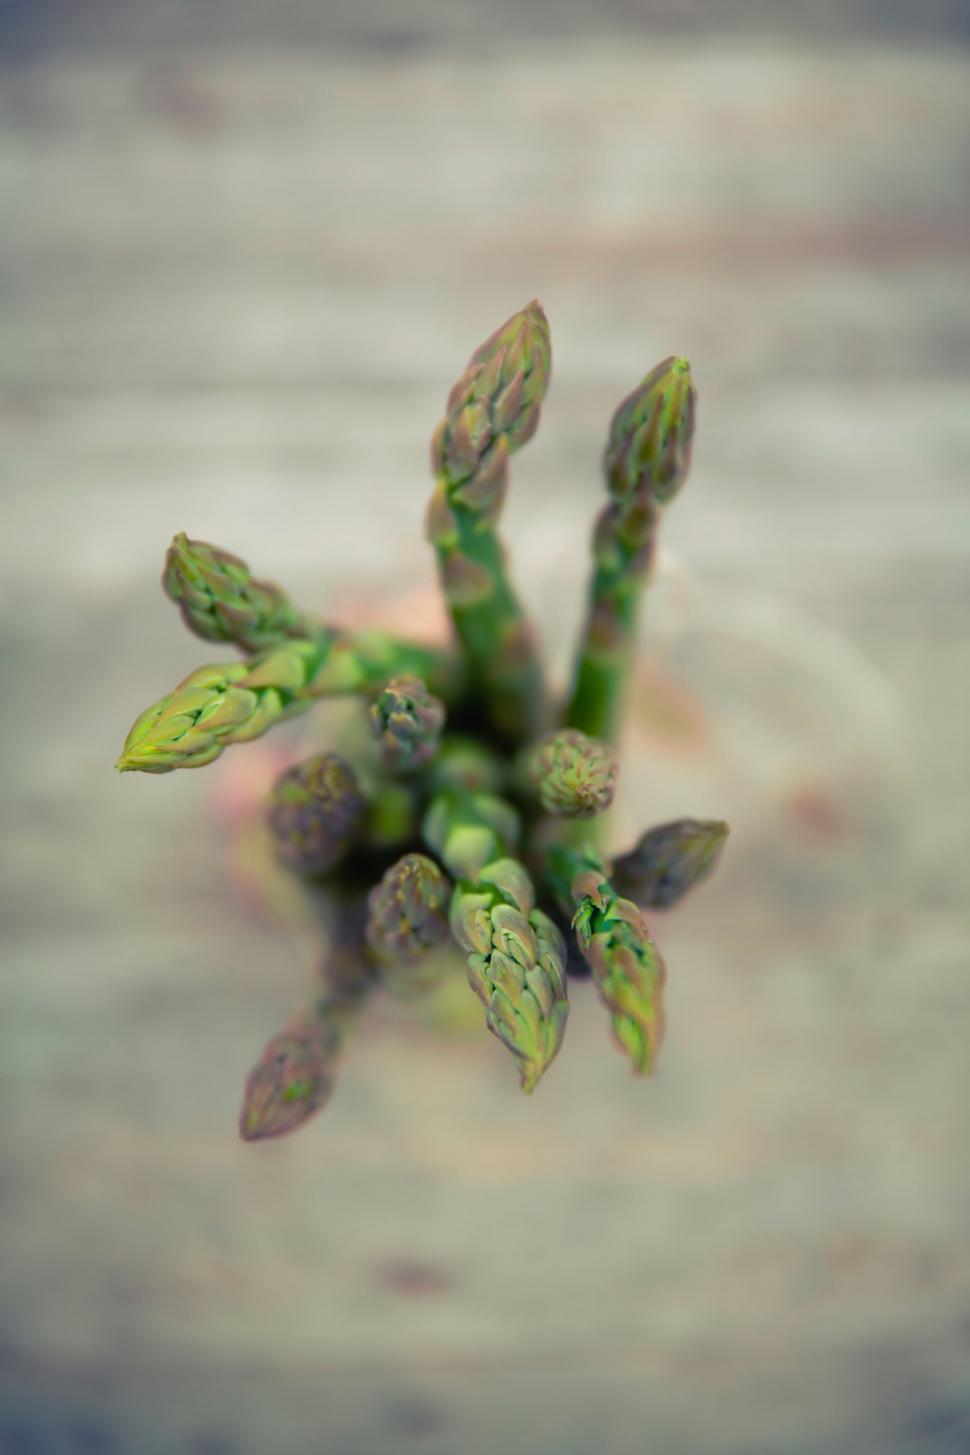 Free Image of Fresh asparagus bunch on rustic surface 